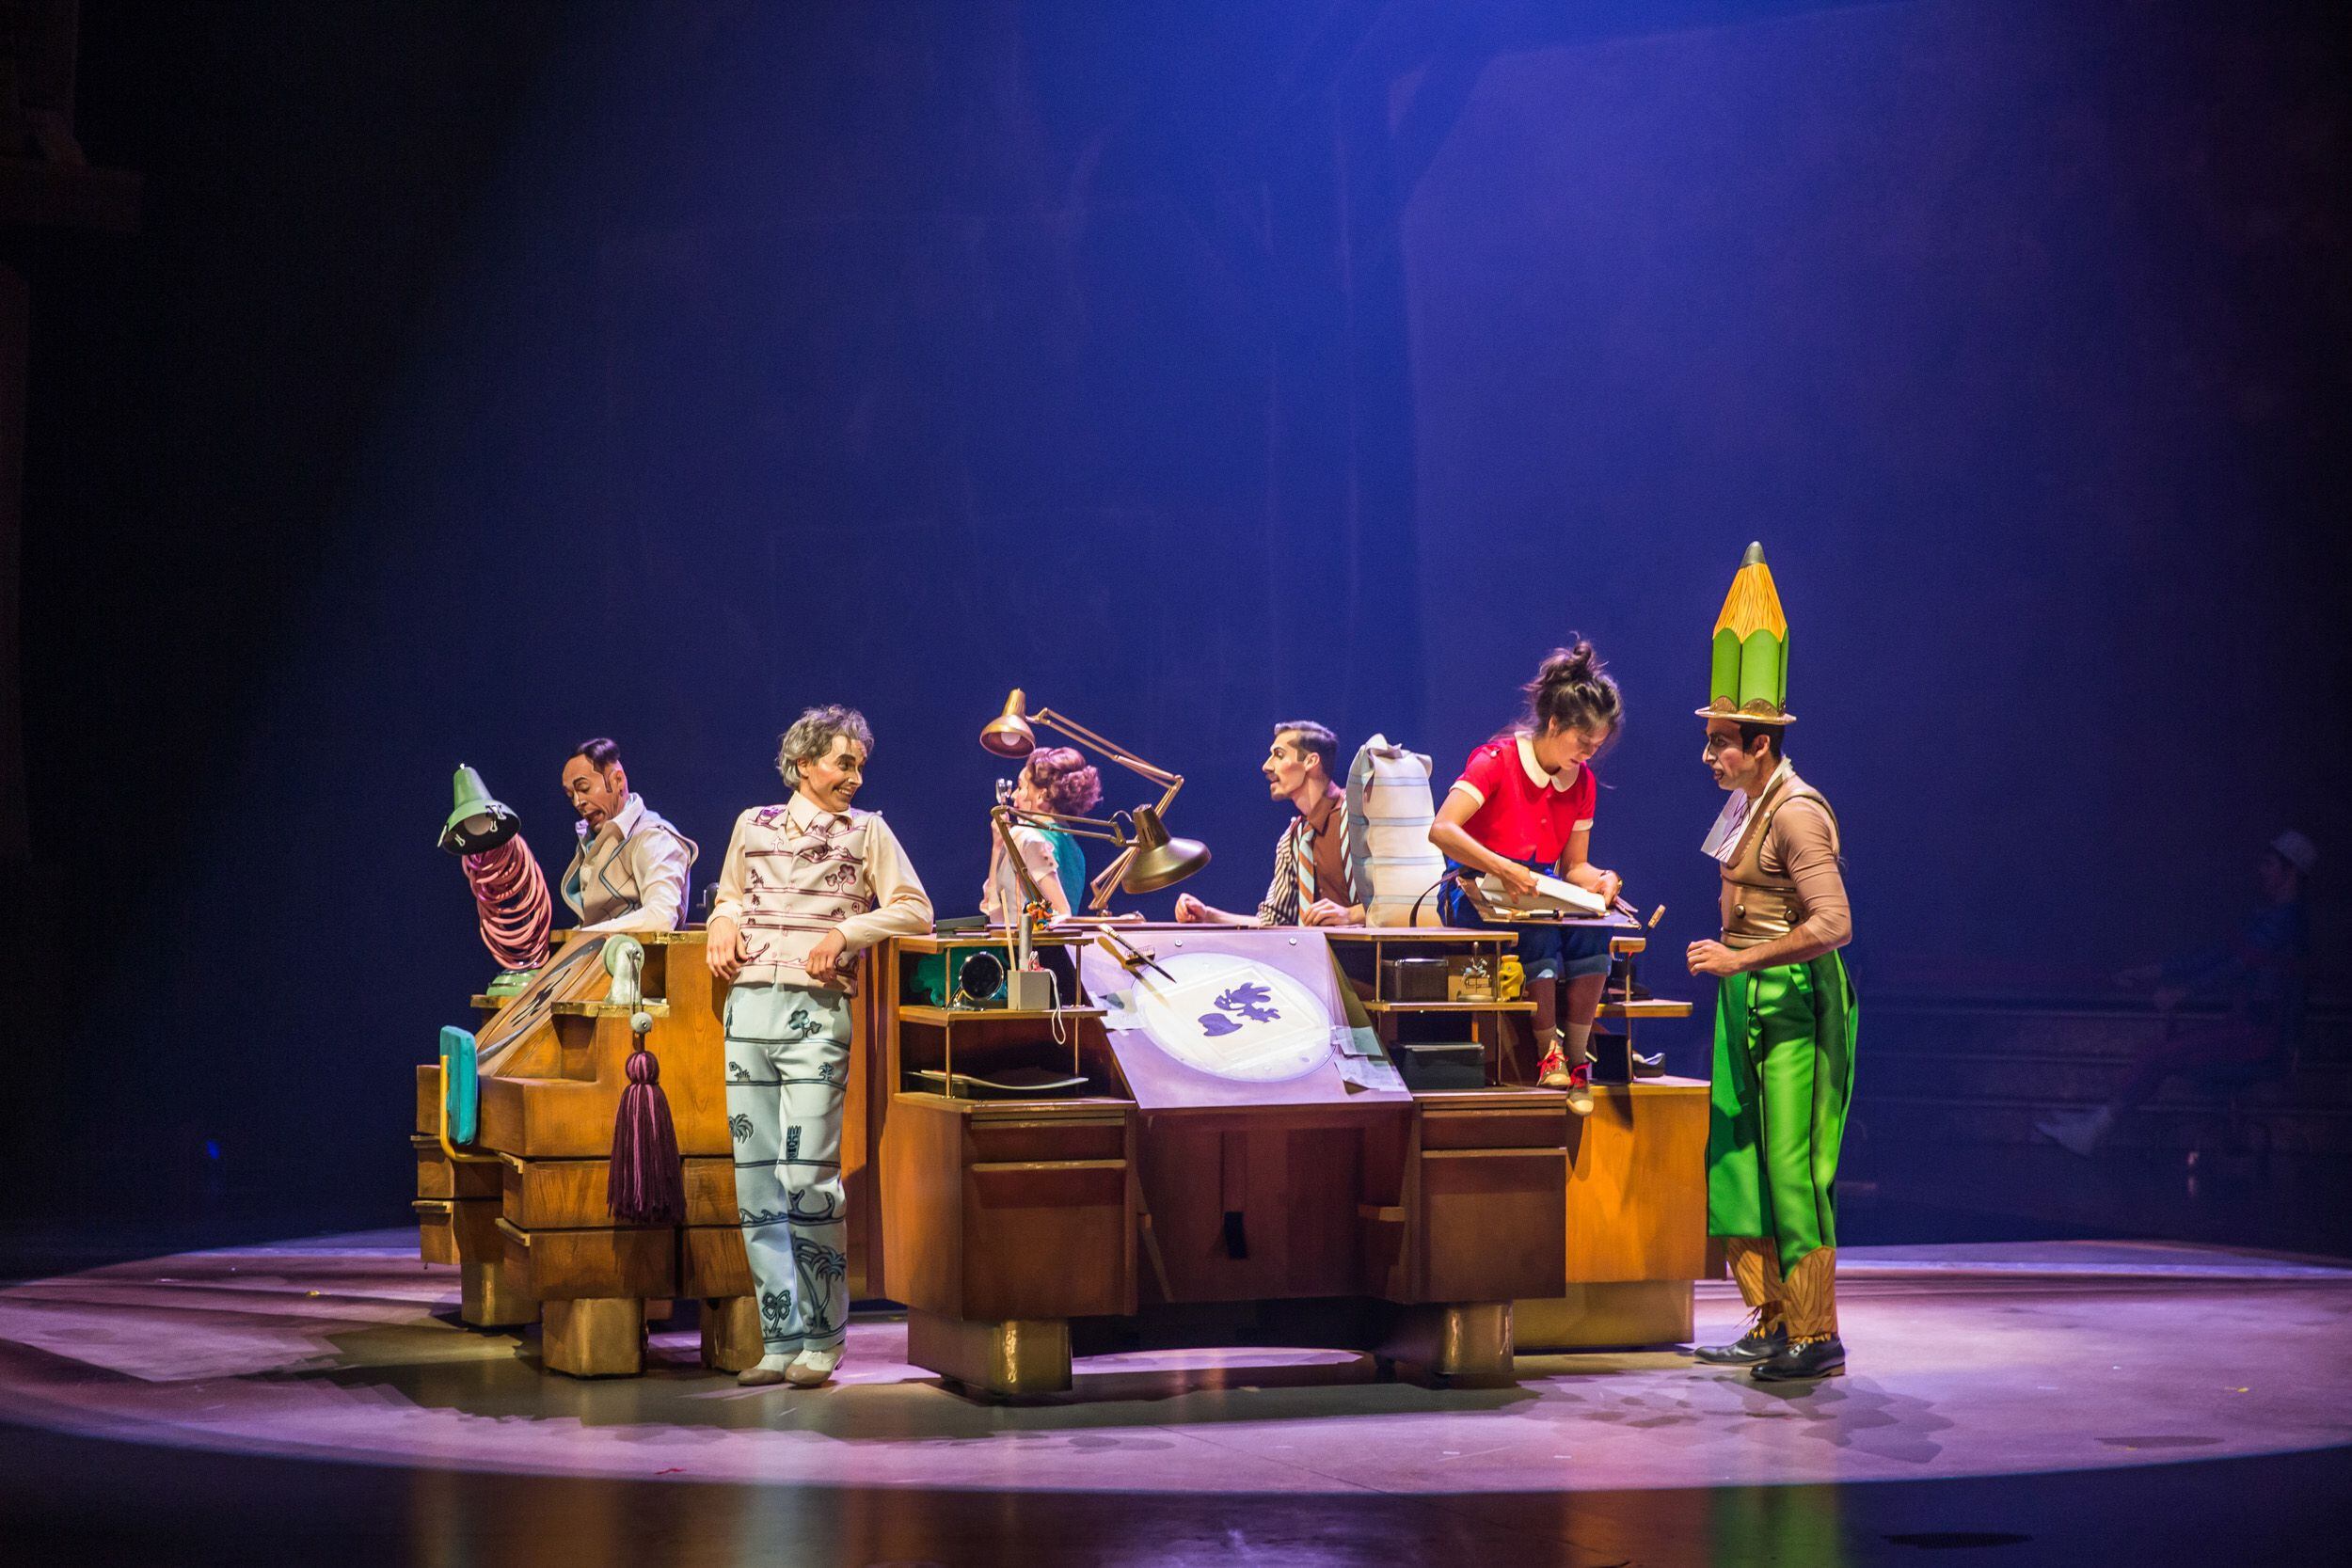 Disney’s ‘Drawn to Life’ Cirque du Soleil show gets opening date